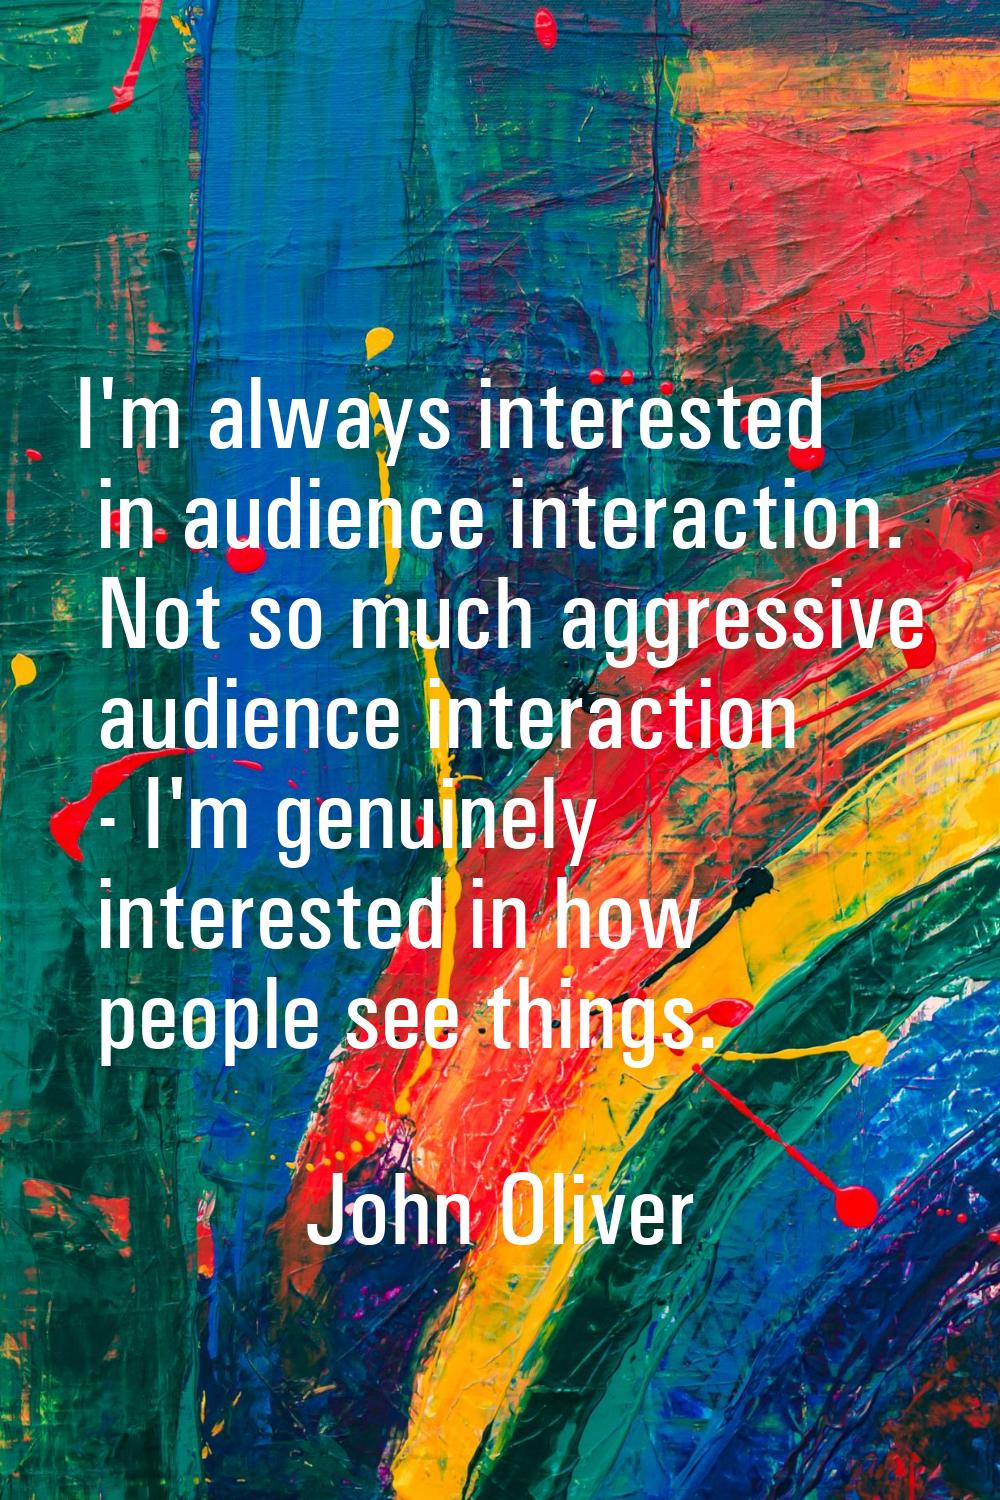 I'm always interested in audience interaction. Not so much aggressive audience interaction - I'm ge